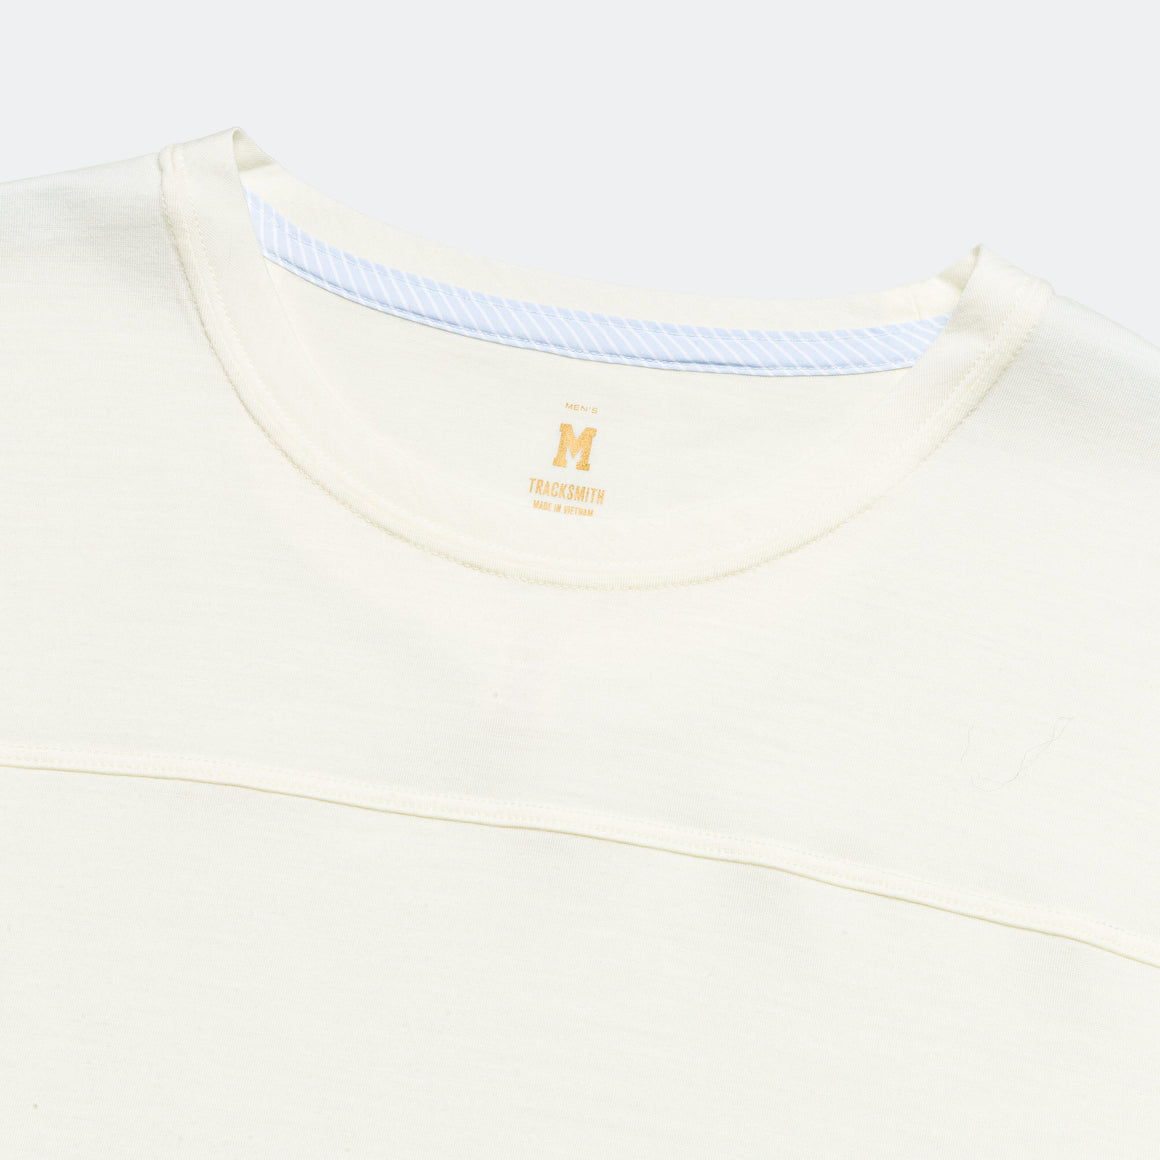 Tracksmith - Mens Harrier Long Sleeve - Birch - Up There Athletics